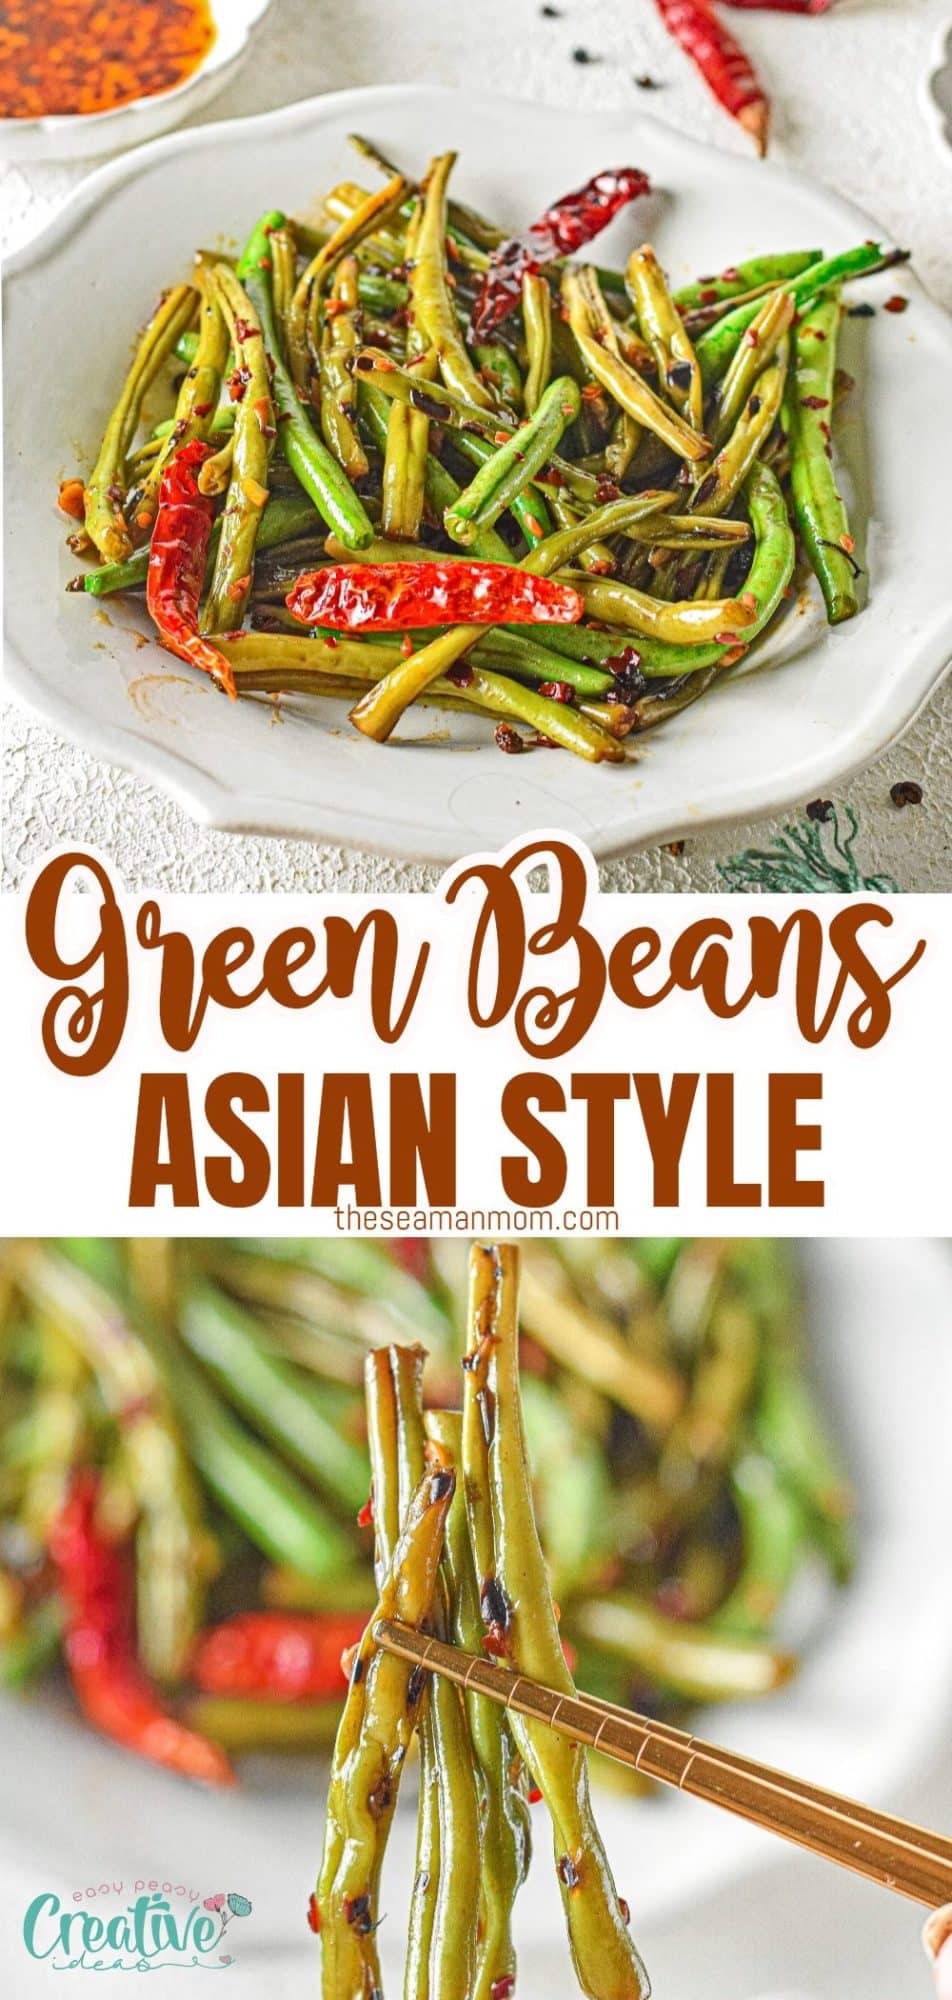 Photo collage of Asian green beans